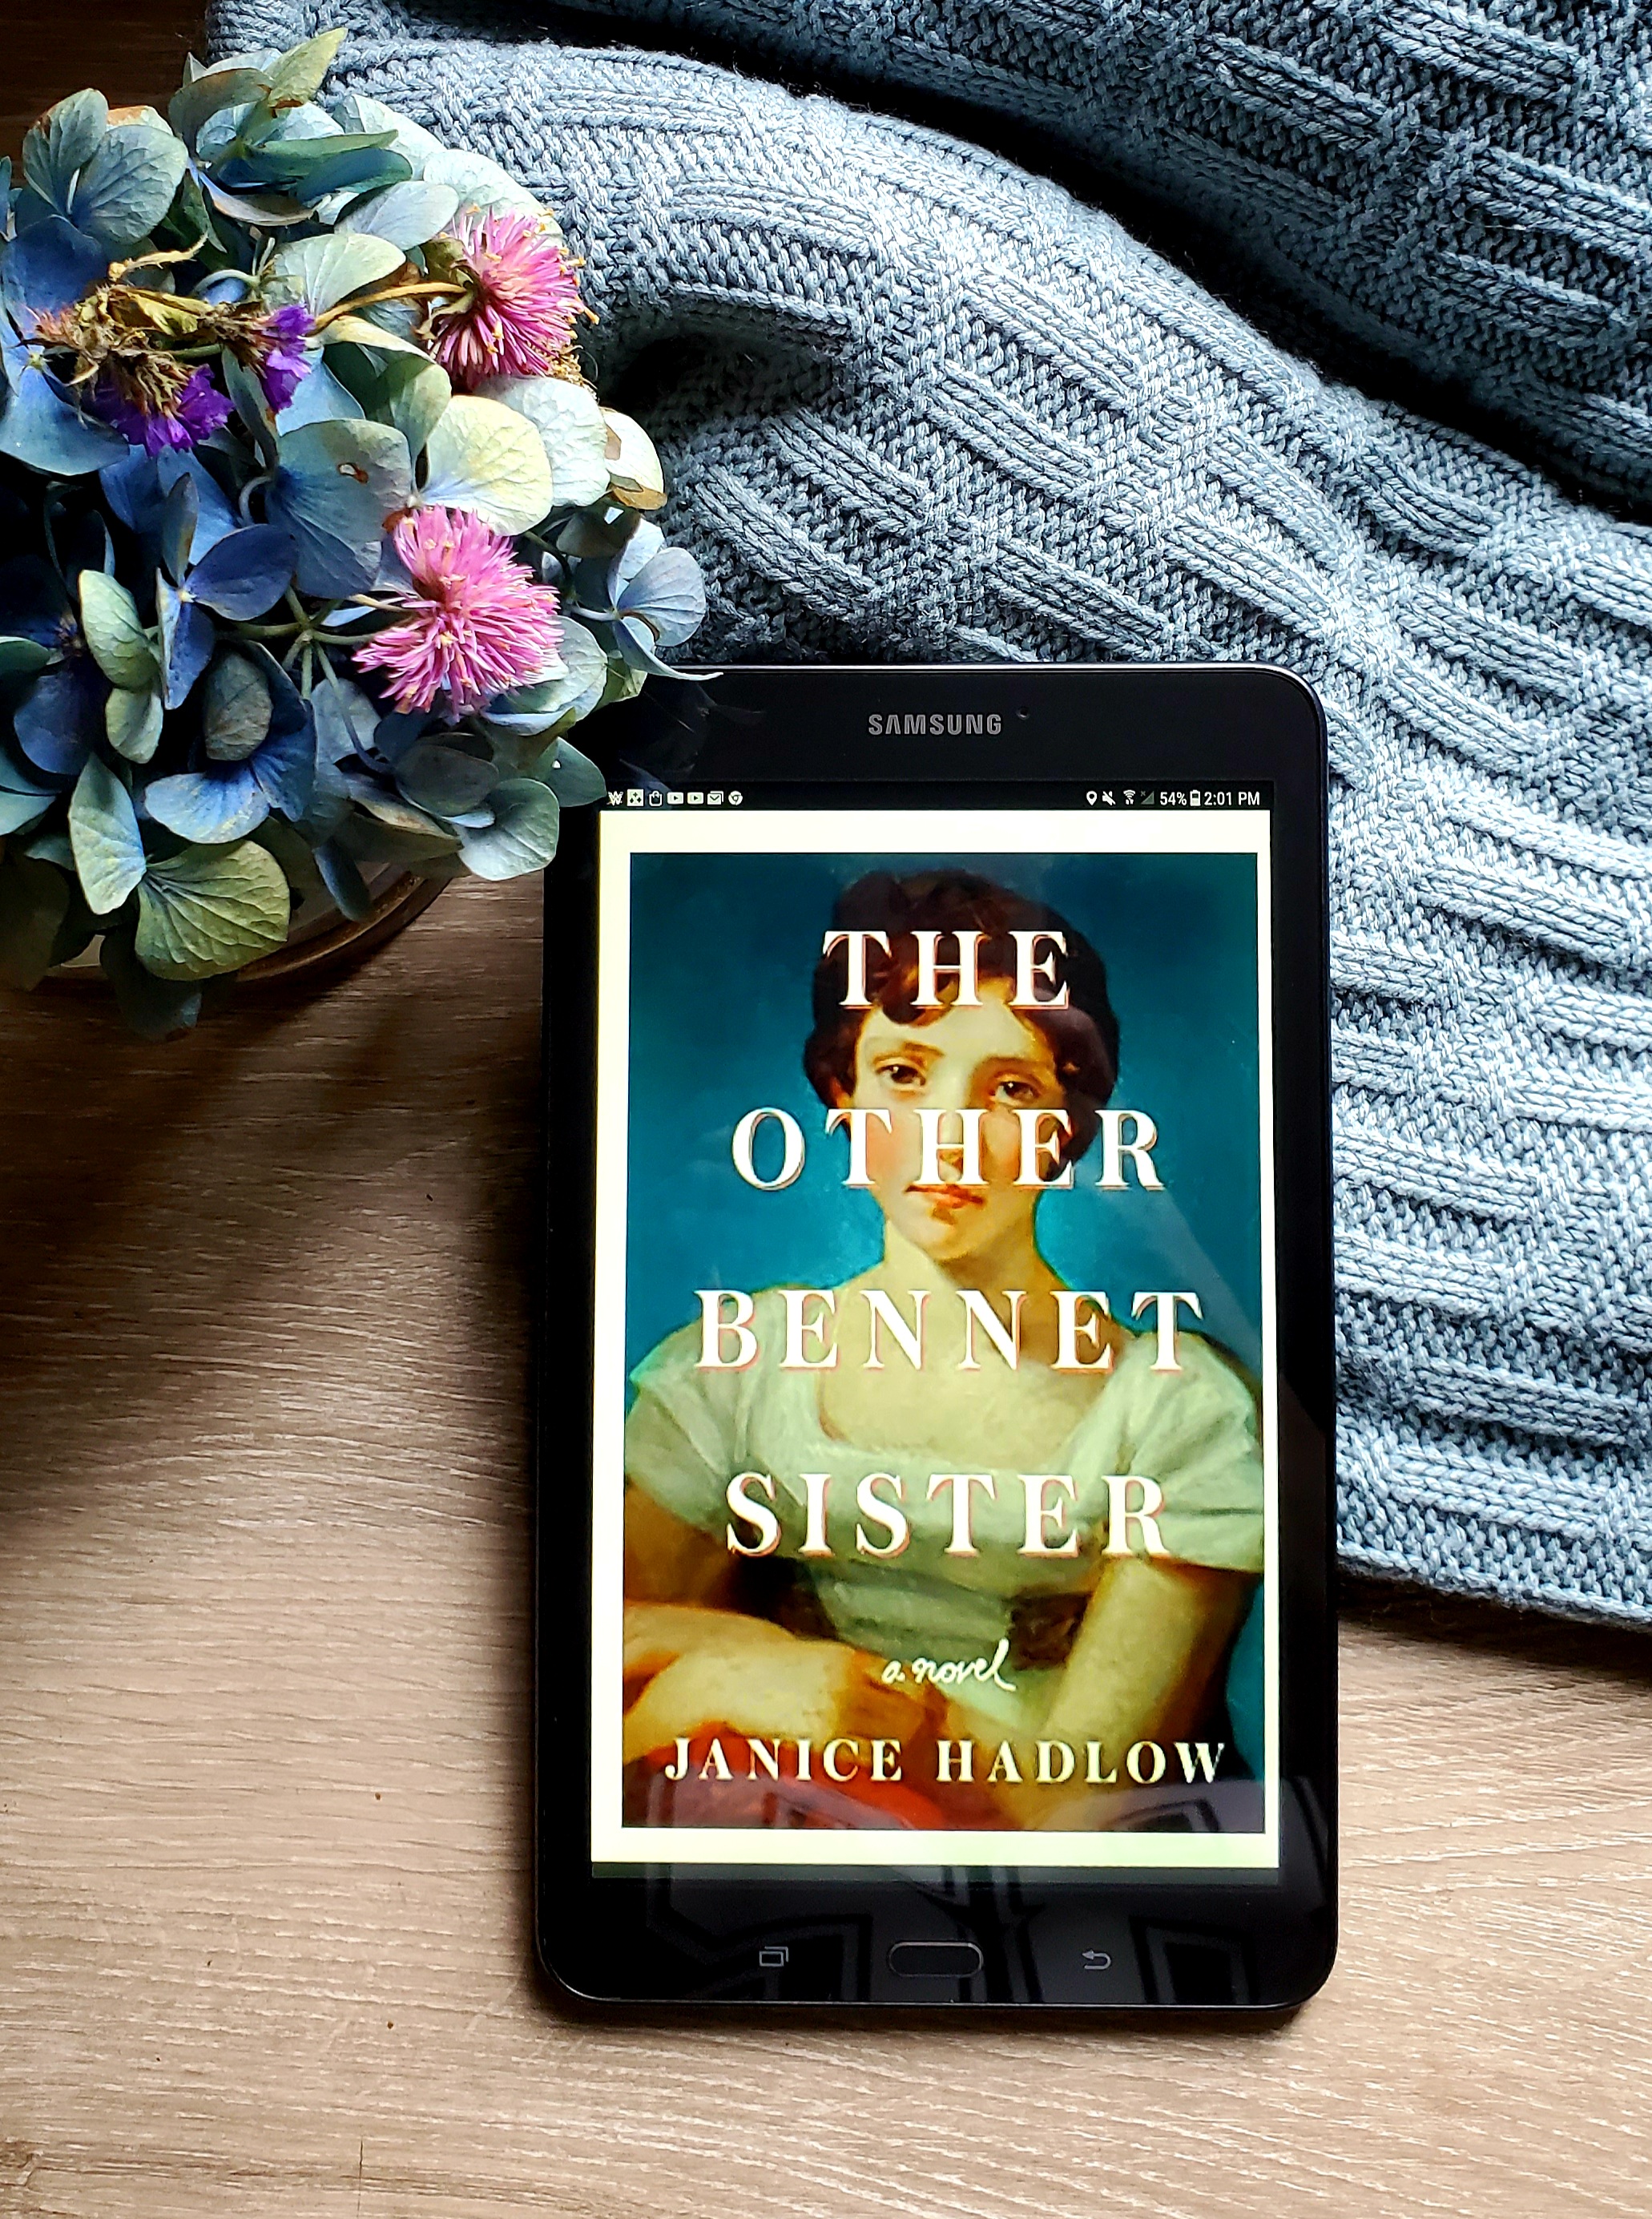 Book Review of THE OTHER BENNET SISTER